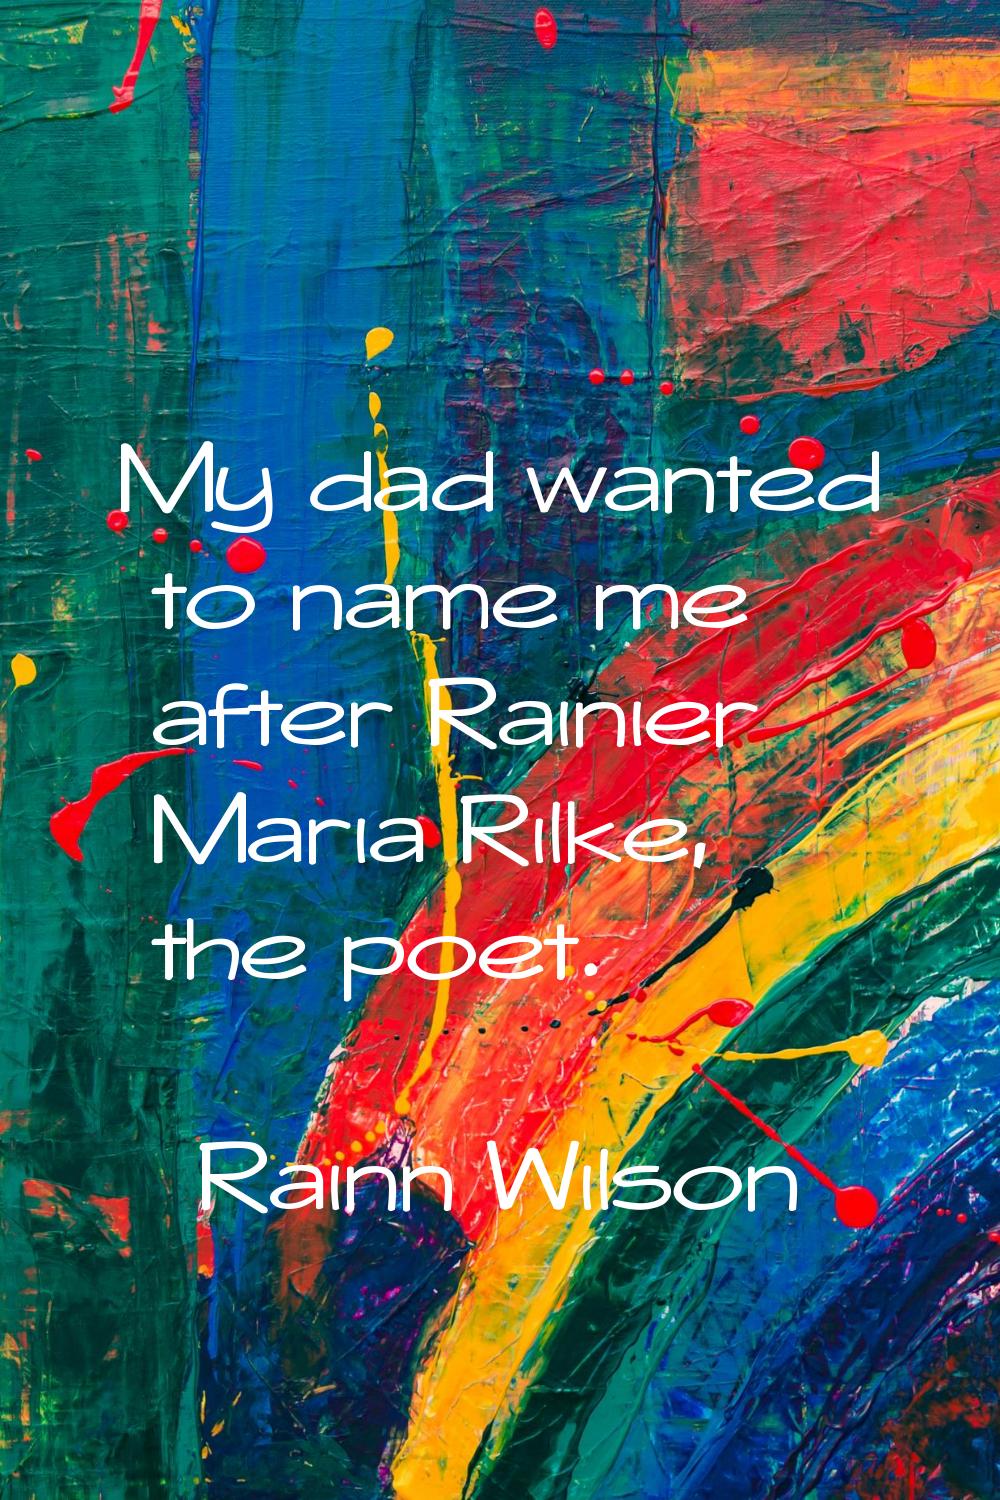 My dad wanted to name me after Rainier Maria Rilke, the poet.